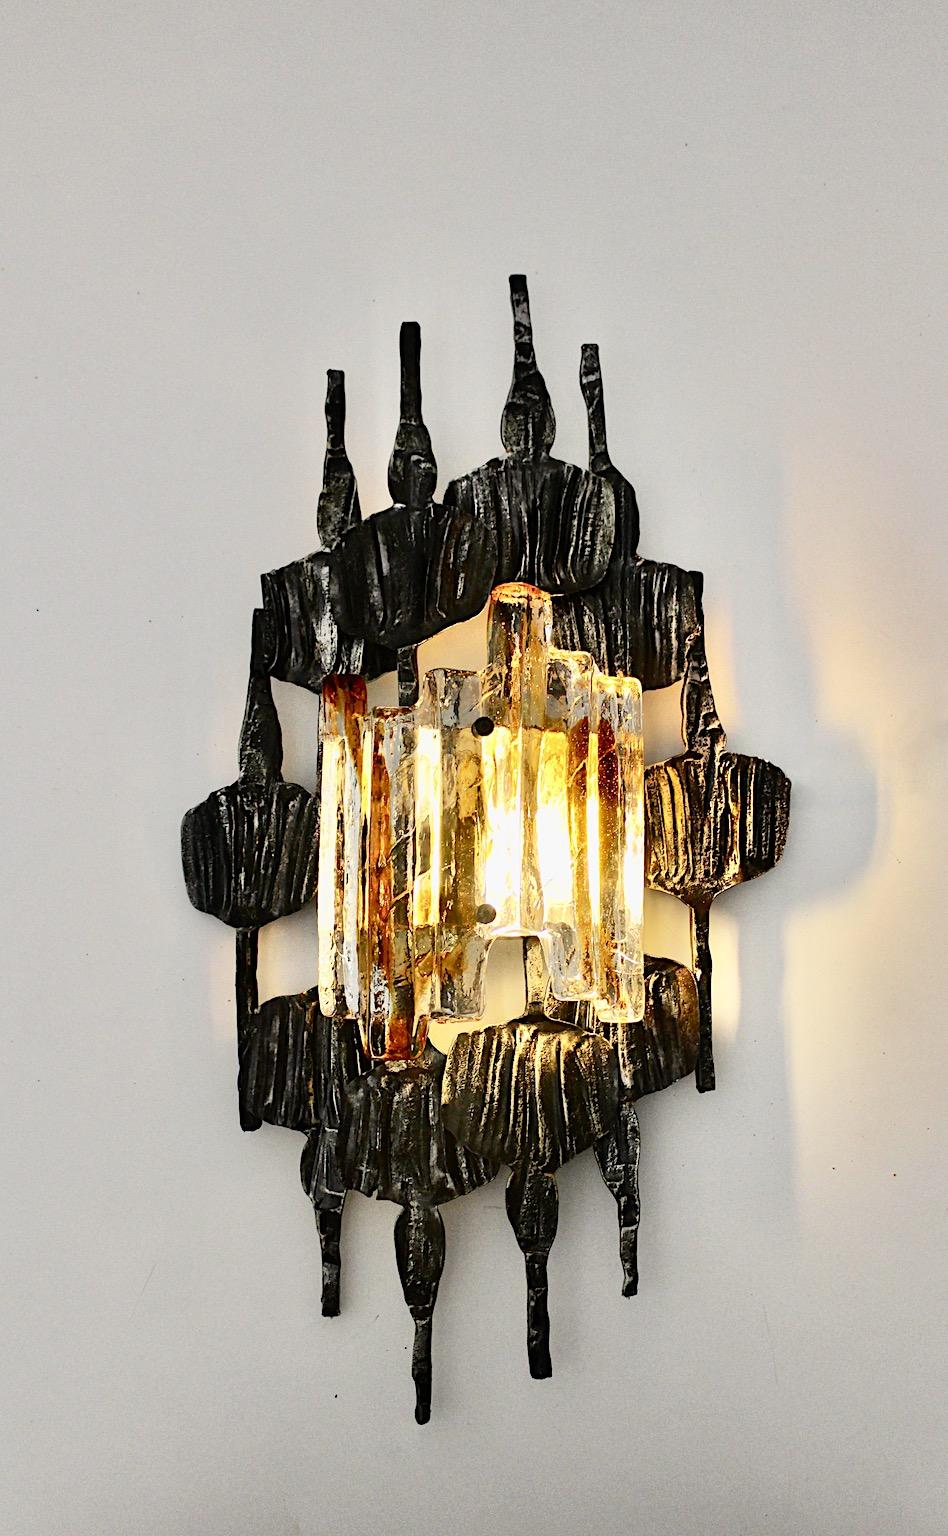 Sculptural Scandinavian Modern sconce or wall light by Tom Ahlstrom & Hans Ehrich from metal and glass 1970s Sweden.
While the sconce shows partly blacked iron frame, the shade features clear glass and glass in amber color tone.
Perfect to use the